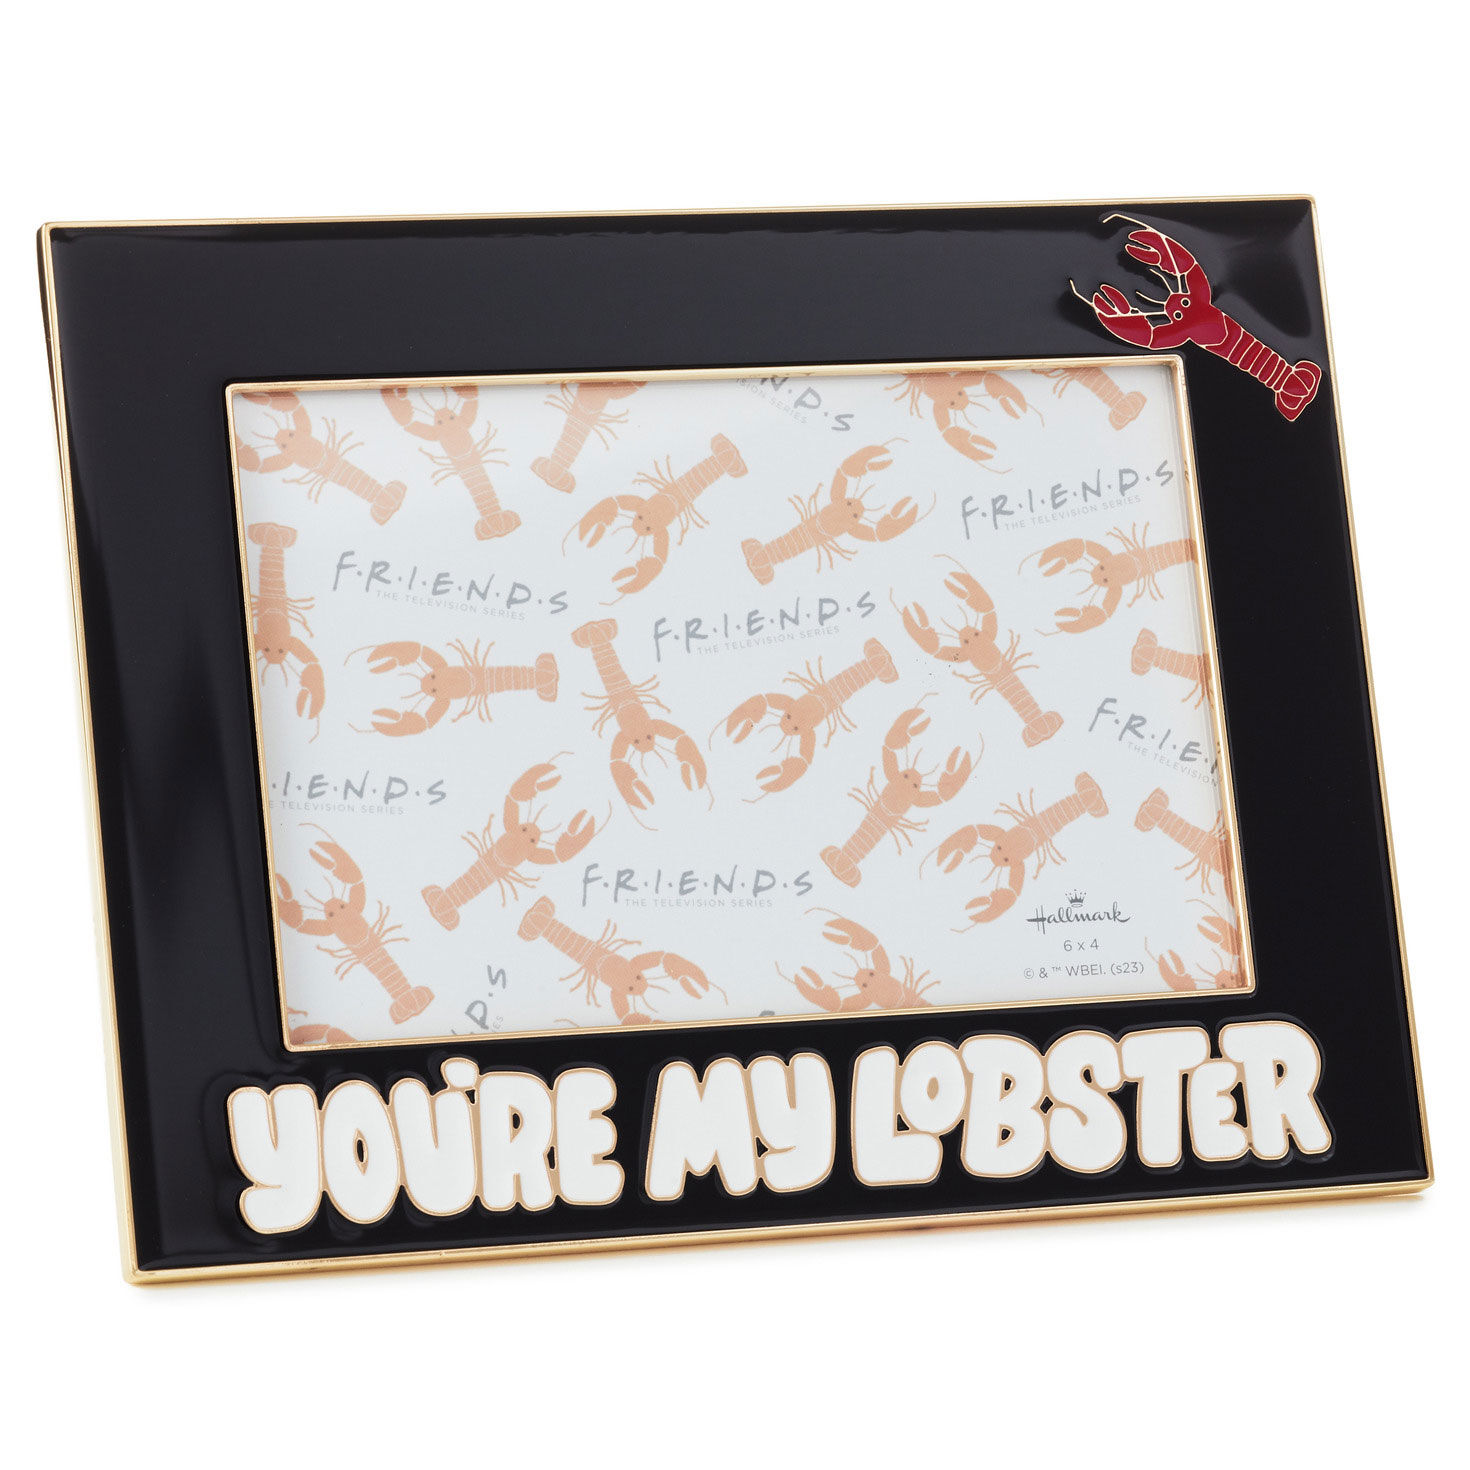 https://www.hallmark.com/dw/image/v2/AALB_PRD/on/demandware.static/-/Sites-hallmark-master/default/dw58f65a66/images/finished-goods/products/1PCL1003/Friends-Youre-My-Lobster-4x6-Frame_1PCL1003_01.jpg?sfrm=jpg